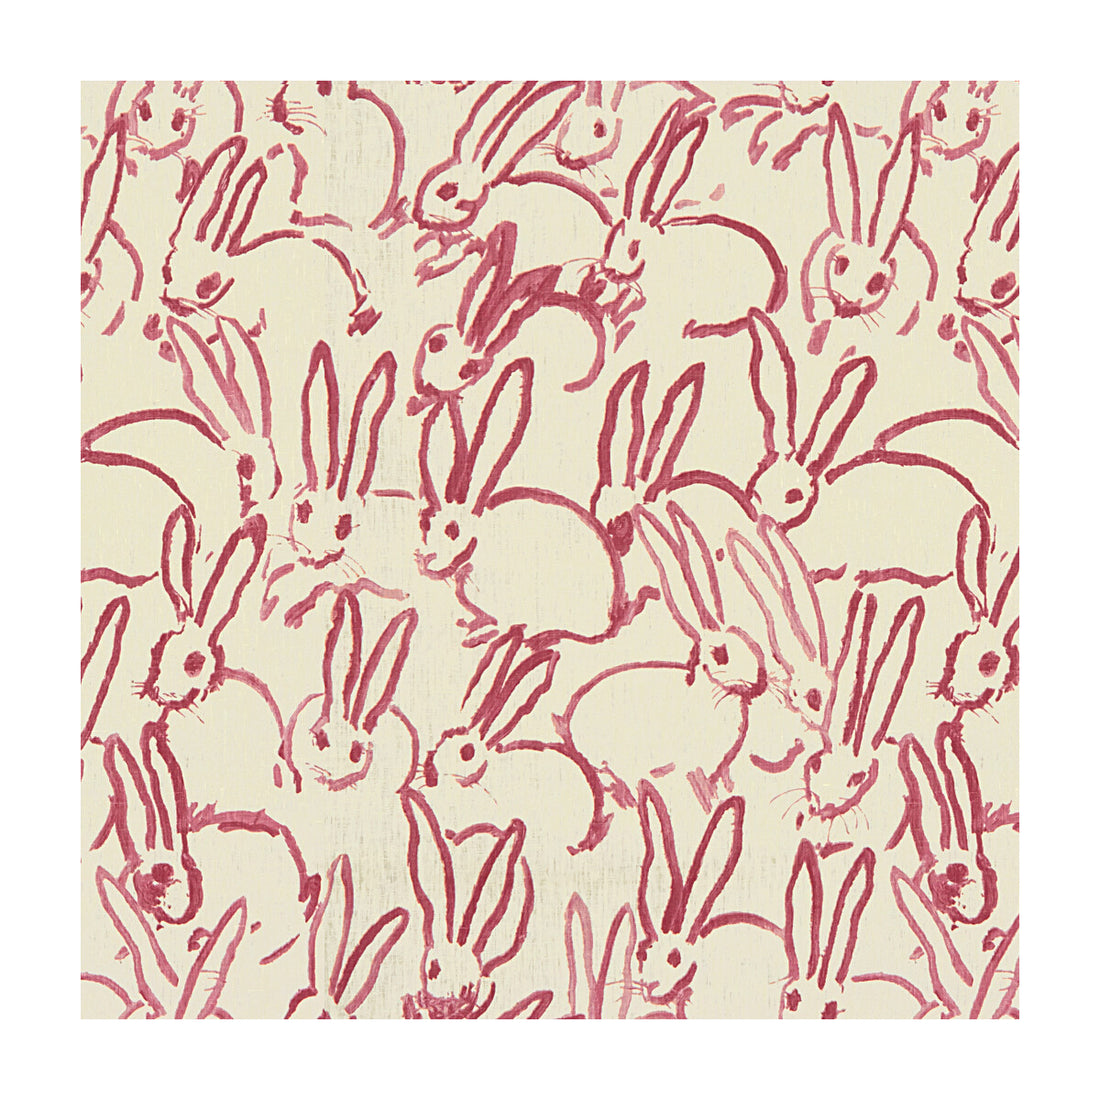 Hutch Print fabric in pink color - pattern GWF-3523.7.0 - by Lee Jofa Modern in the Hunt Slonem For Groundworks collection